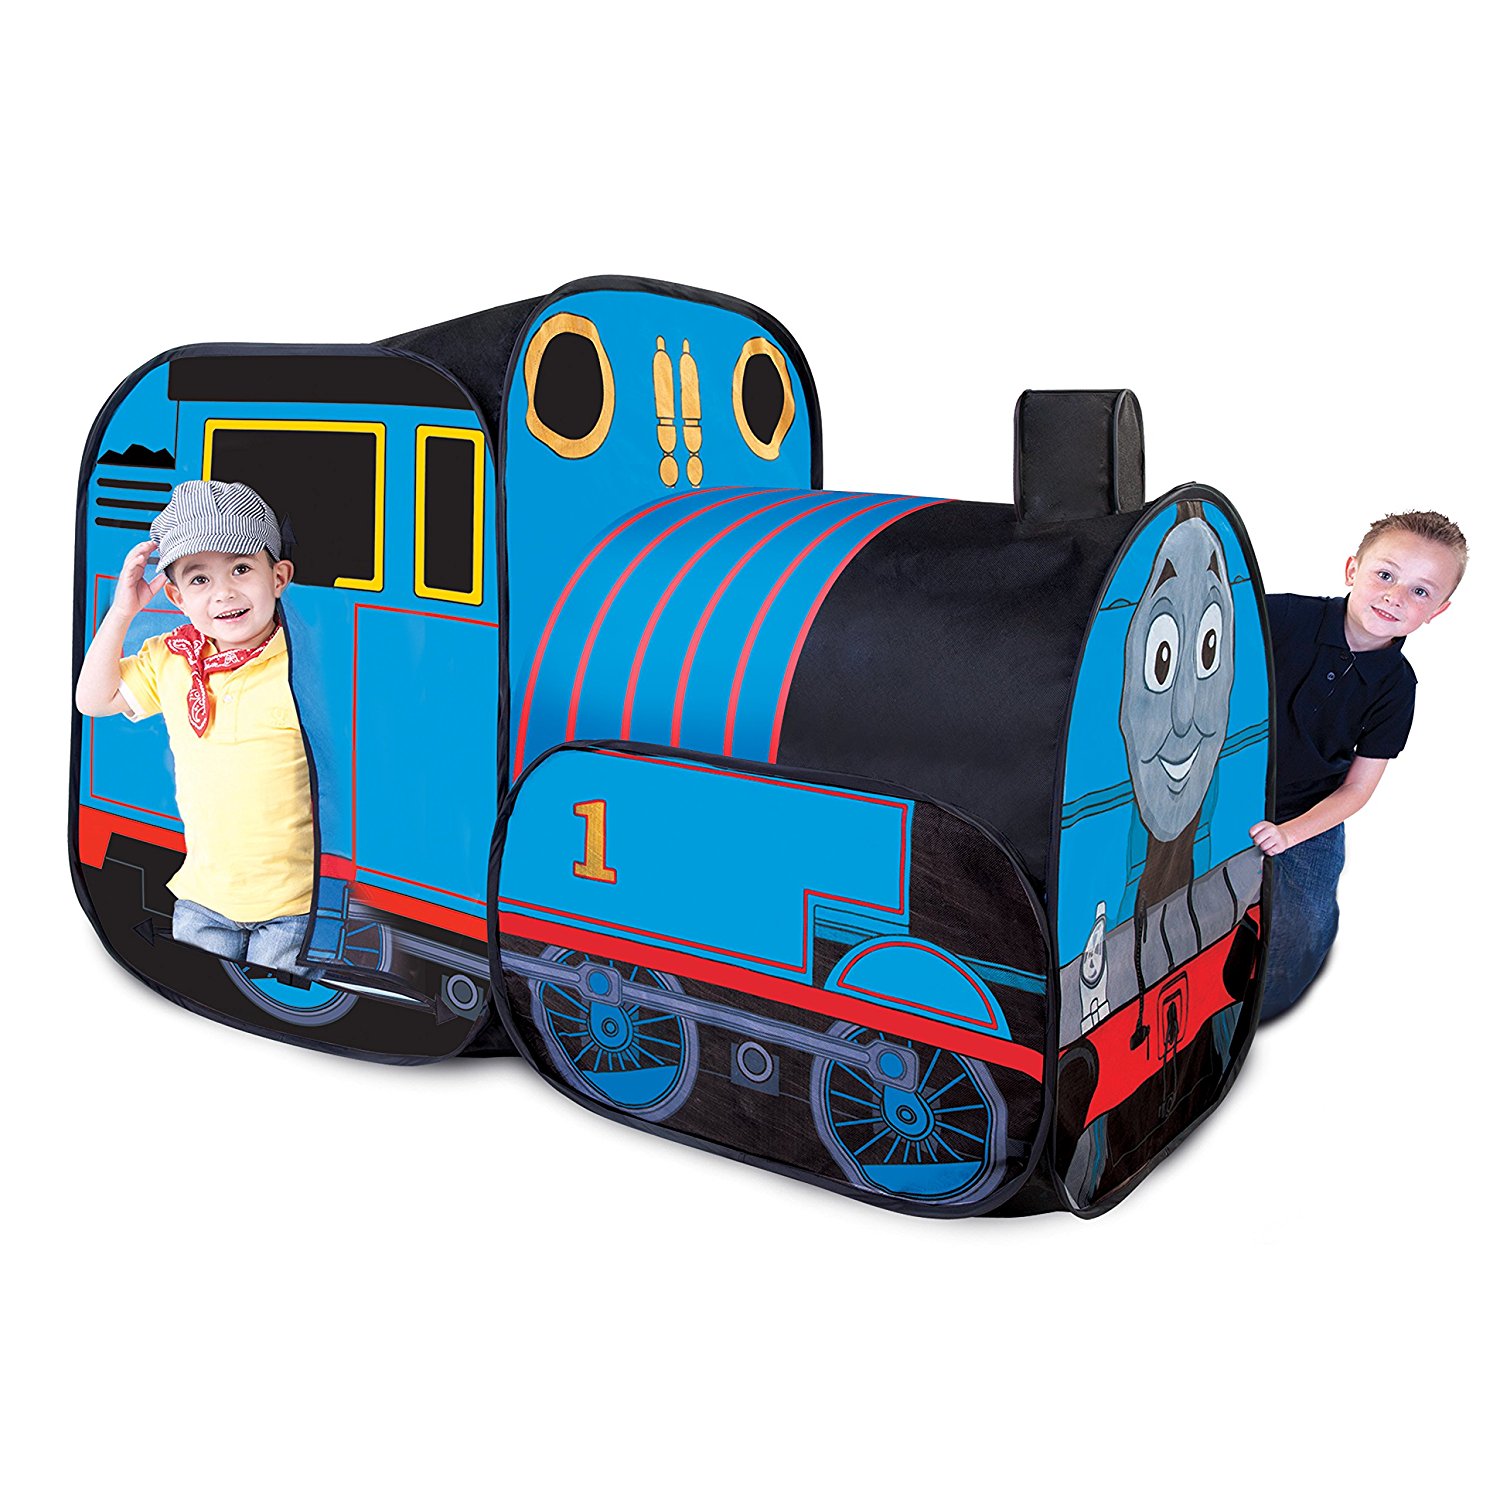 AIOIAI Lovely Train Shaped Kids Play Tent Baby Tent House Children Indoor Play Ball Tent